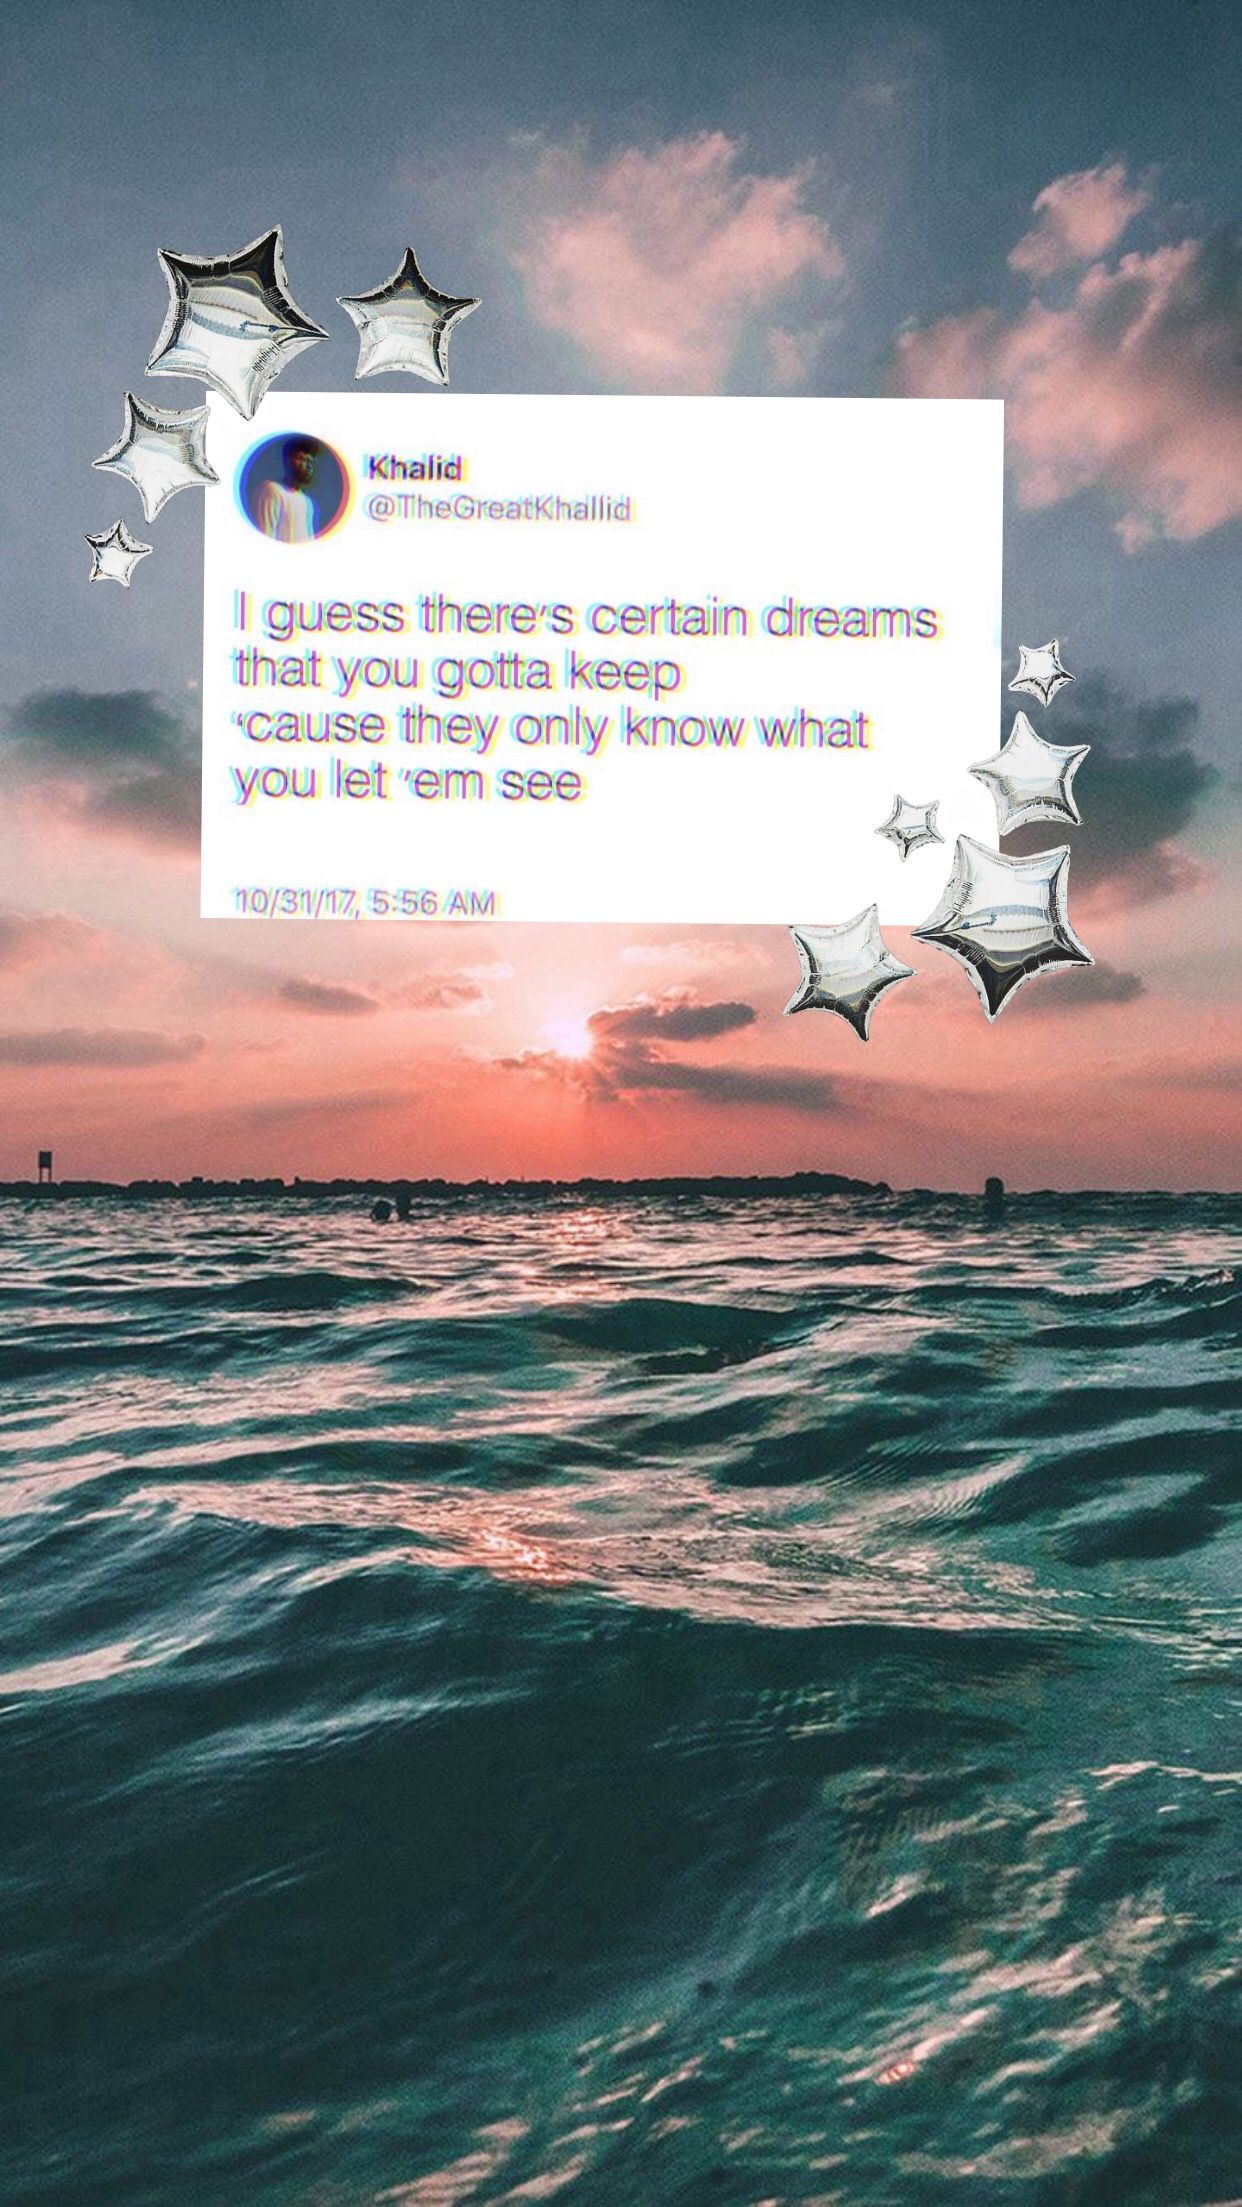 Here's a wallpaper:) Khalid inspires me so much. #wallpaper #tweets #sunset. Khalid quotes, Wallpaper quotes, Tweet quotes